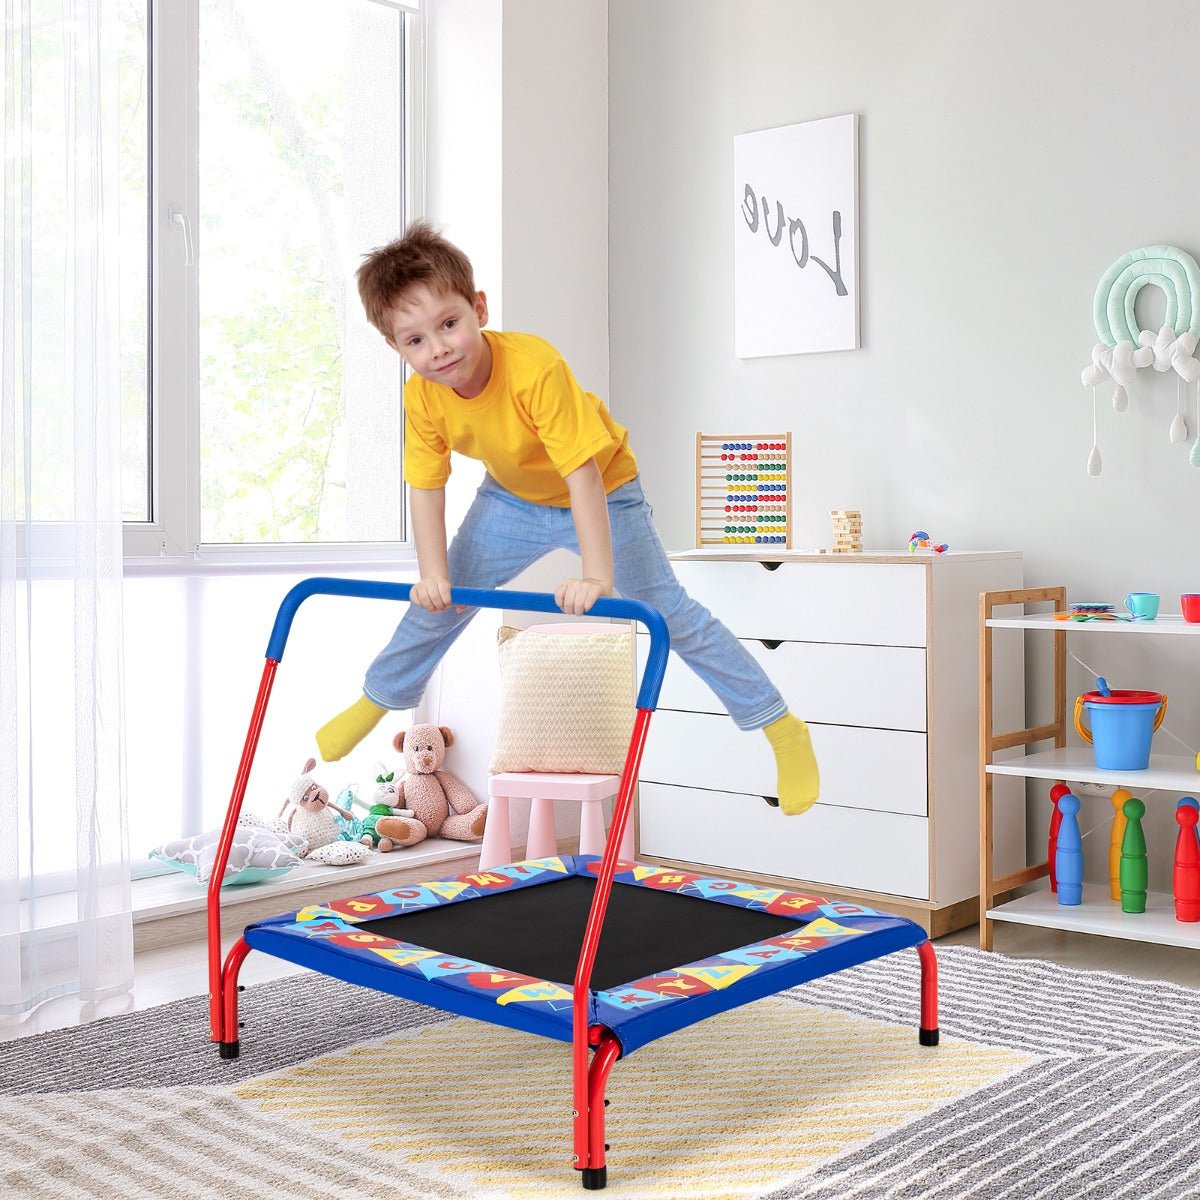 Bounce with Joy: Square Toddler Trampoline with Foam Covered Handle for Kids